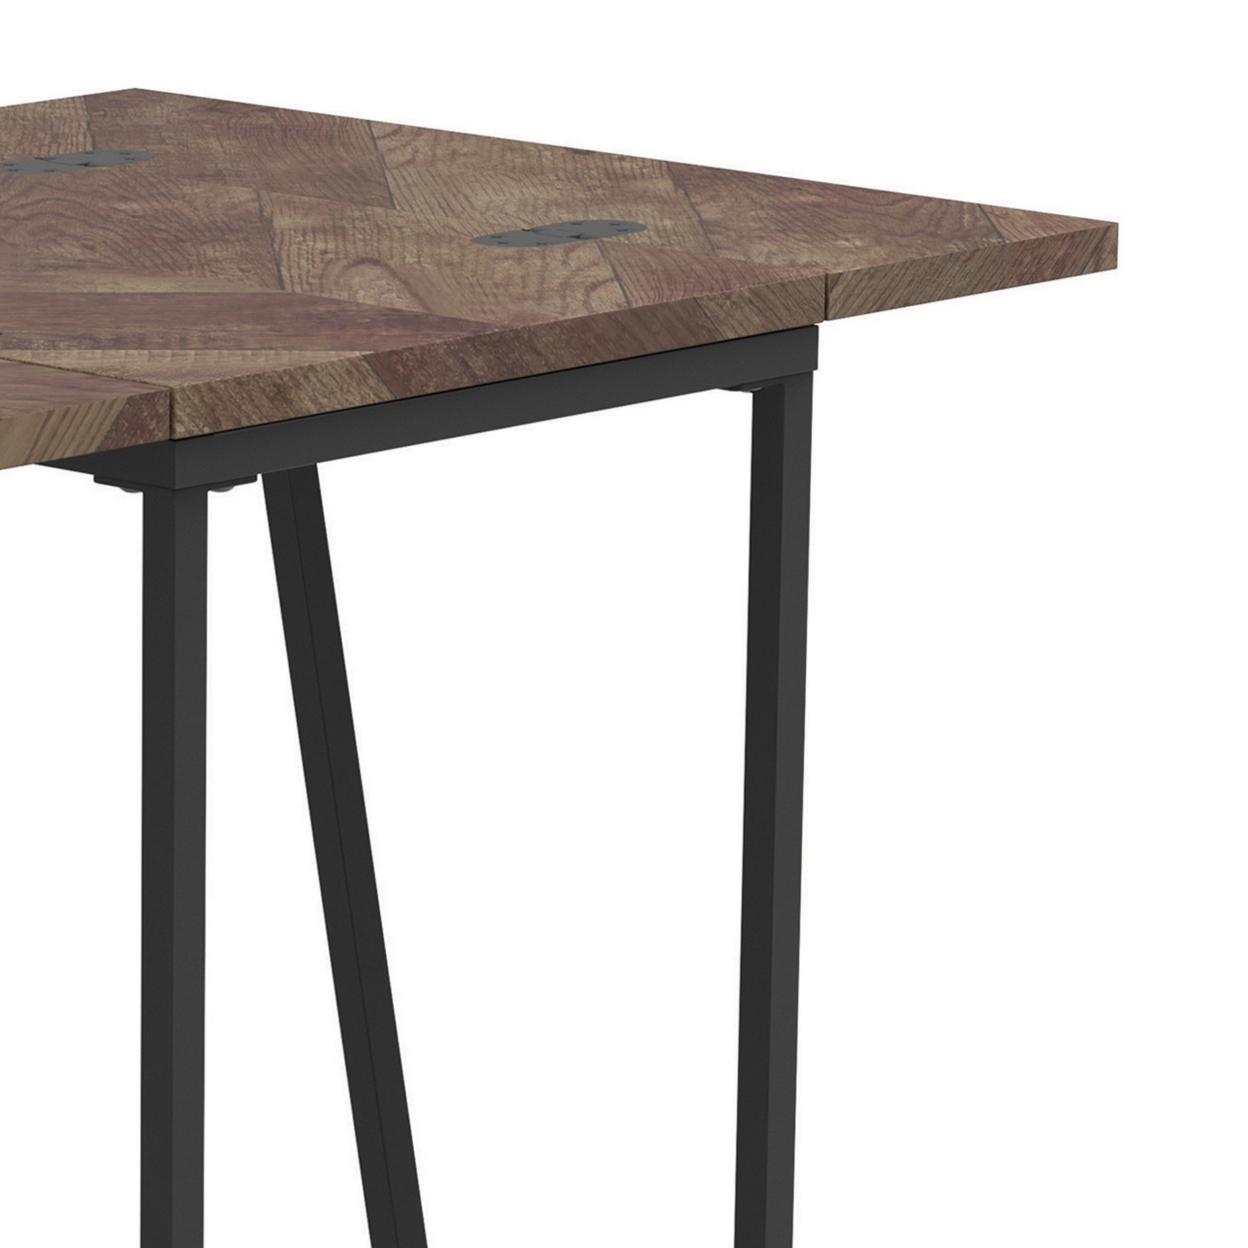 Accent Table With Wooden Extendable Top And Metal Frame, Brown And Black- Saltoro Sherpi